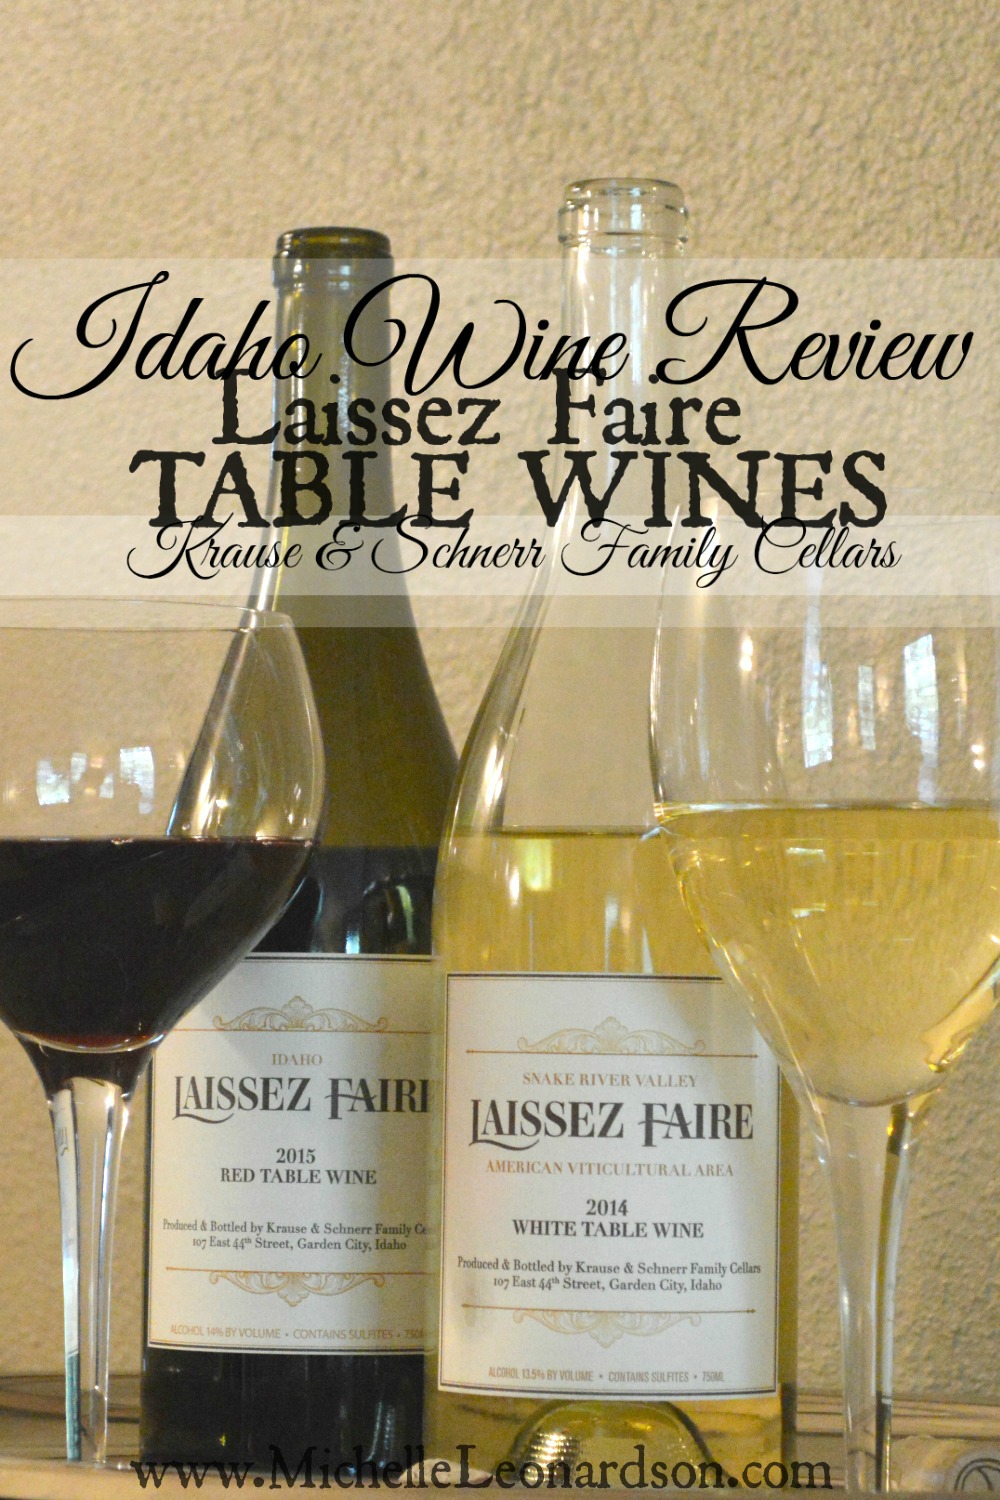 The skillfully crafted Laissez Faire Table Wines from Krause & Schnerr Family Cellars are for good times, good food and good friends. So eat, drink and be merry!